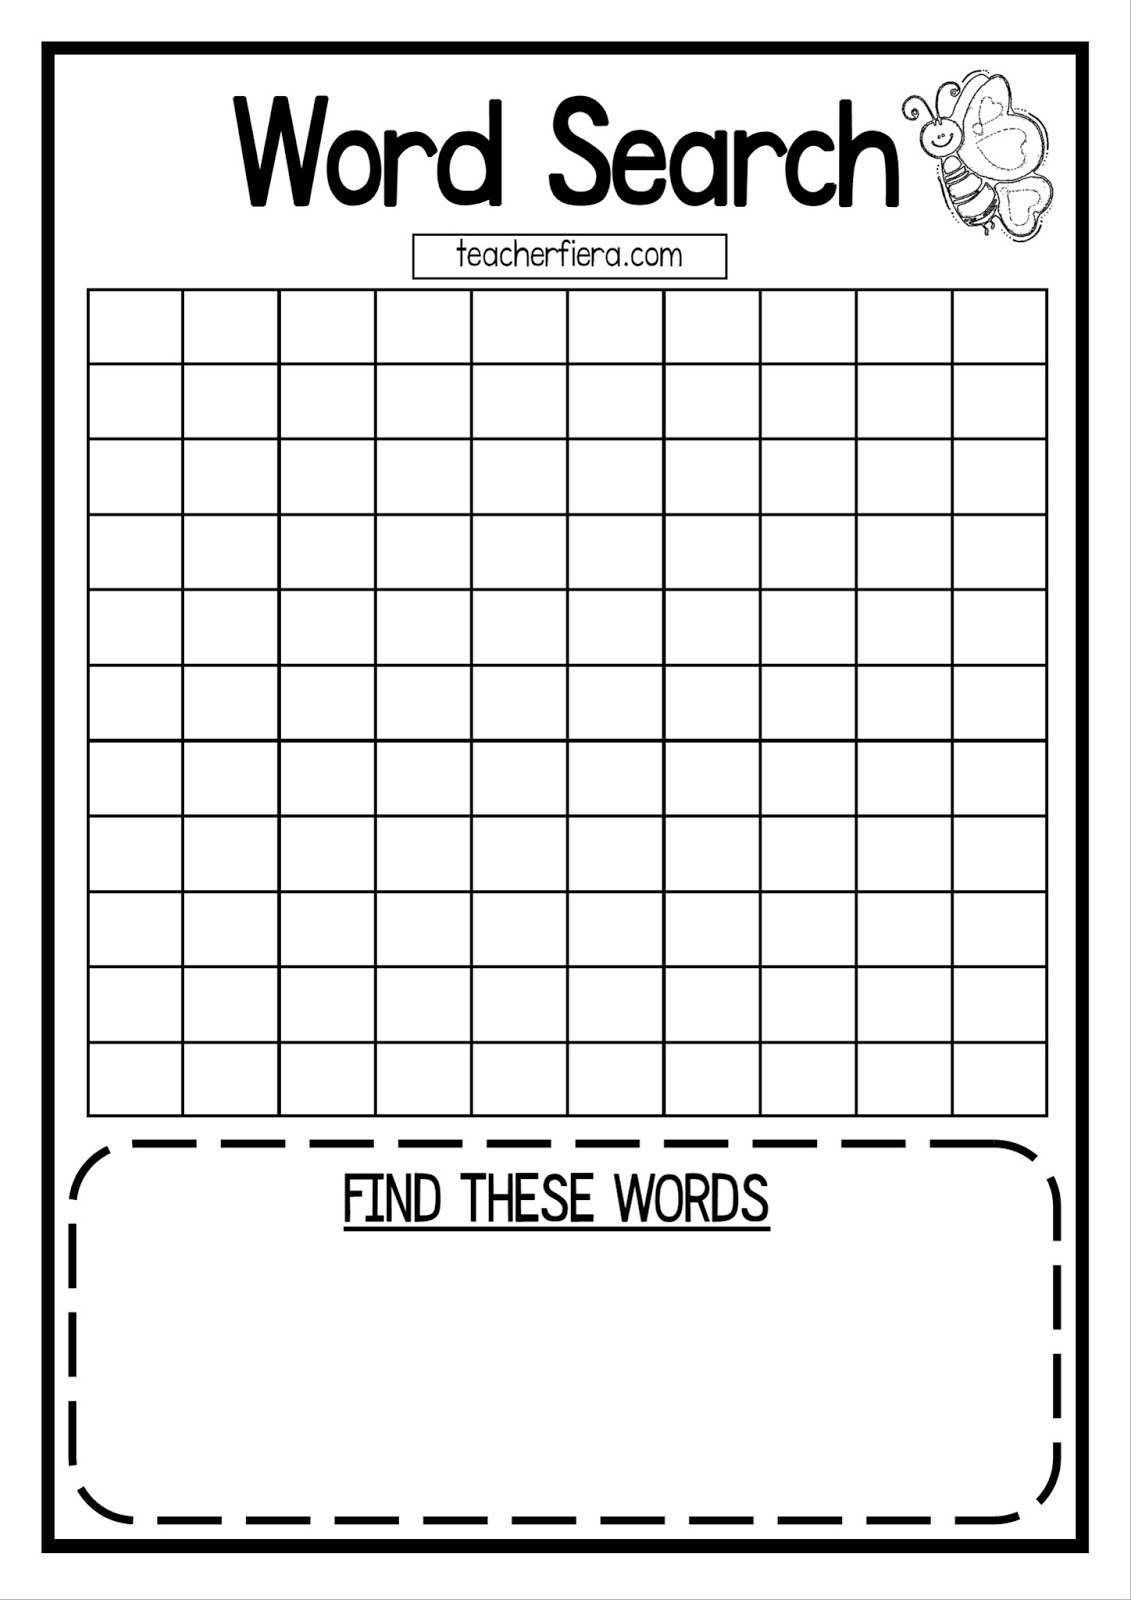 Word Search Maker Free Printable Free Printable Word Search Maker